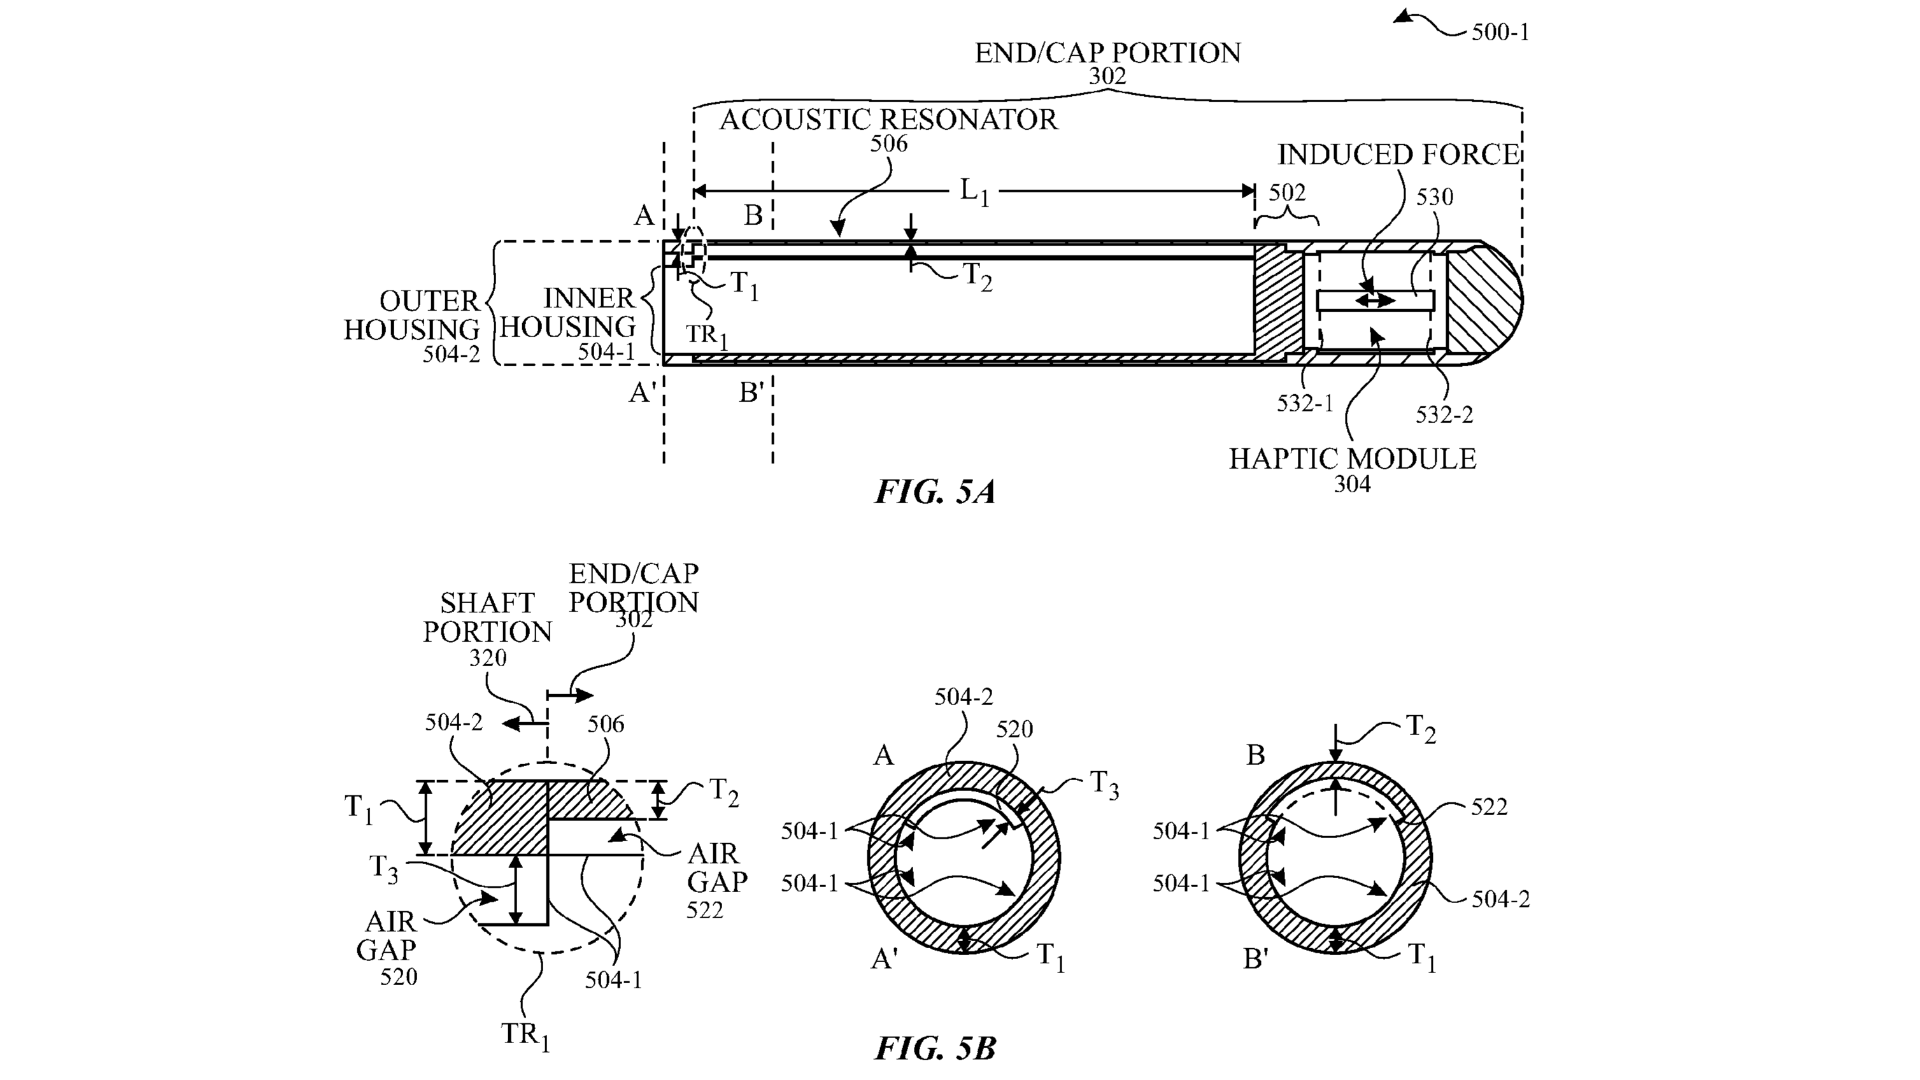 Patent drawing showing a future Apple Pencil with an acoustic resonator in the cap